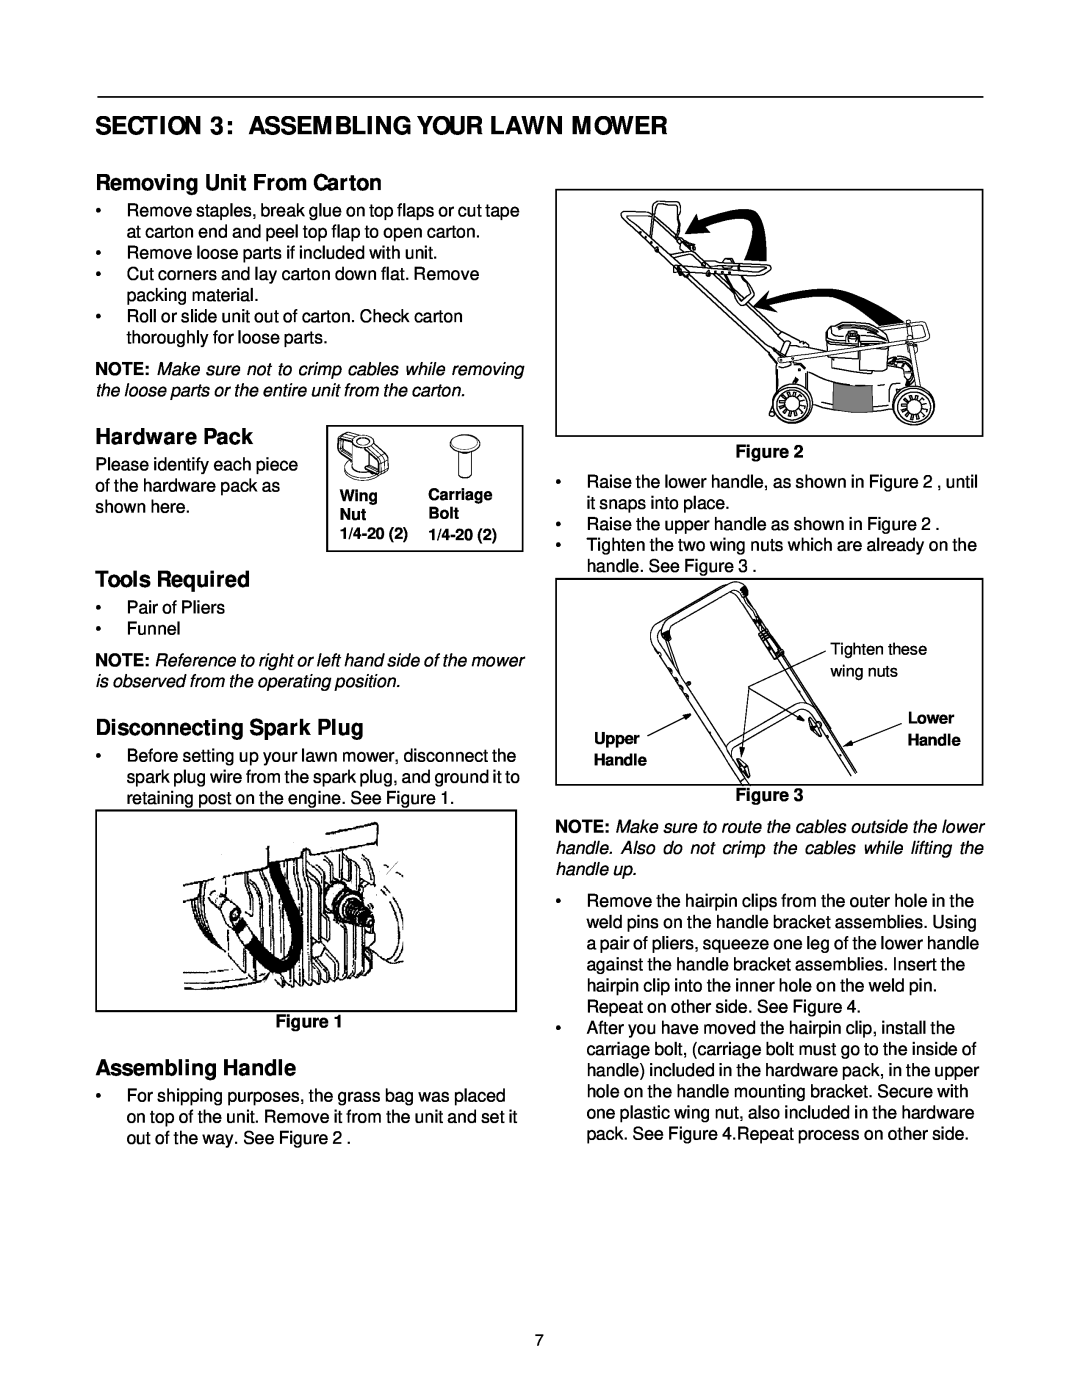 Yard-Man 435 manual Assembling Your Lawn Mower, Removing Unit From Carton, Hardware Pack, Tools Required, Assembling Handle 